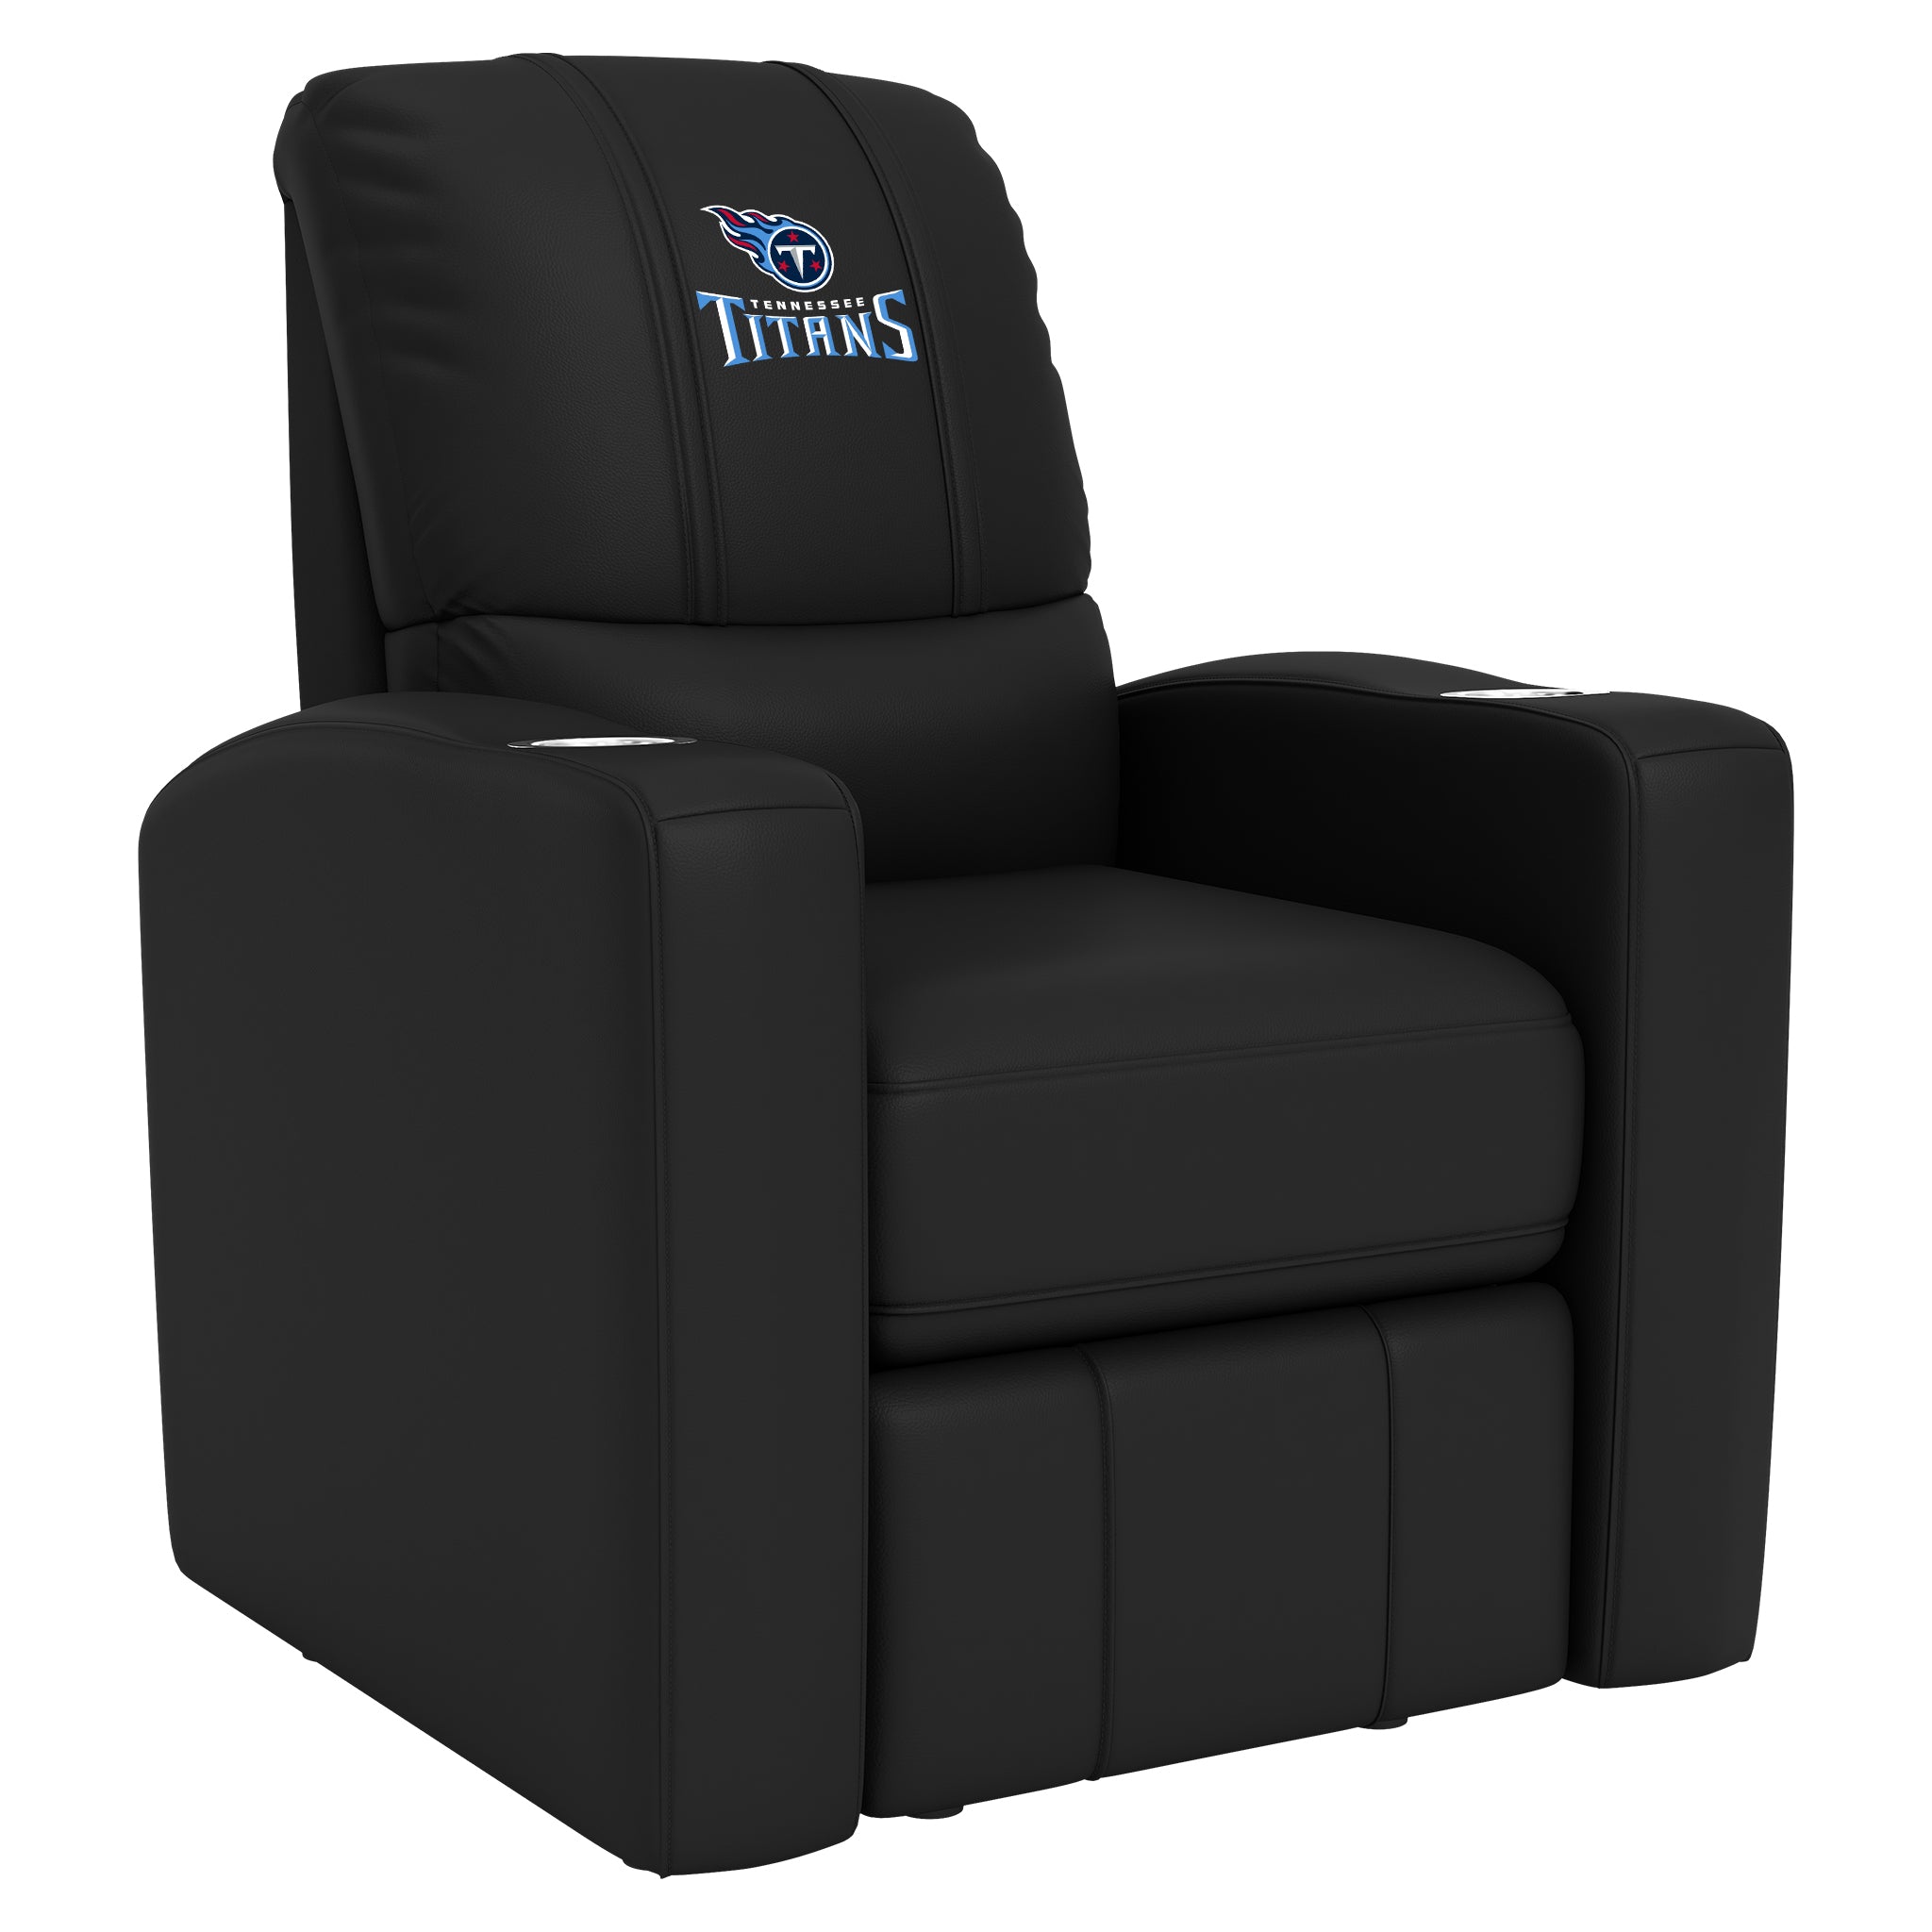 Tennessee Titans Stealth Recliner Manual